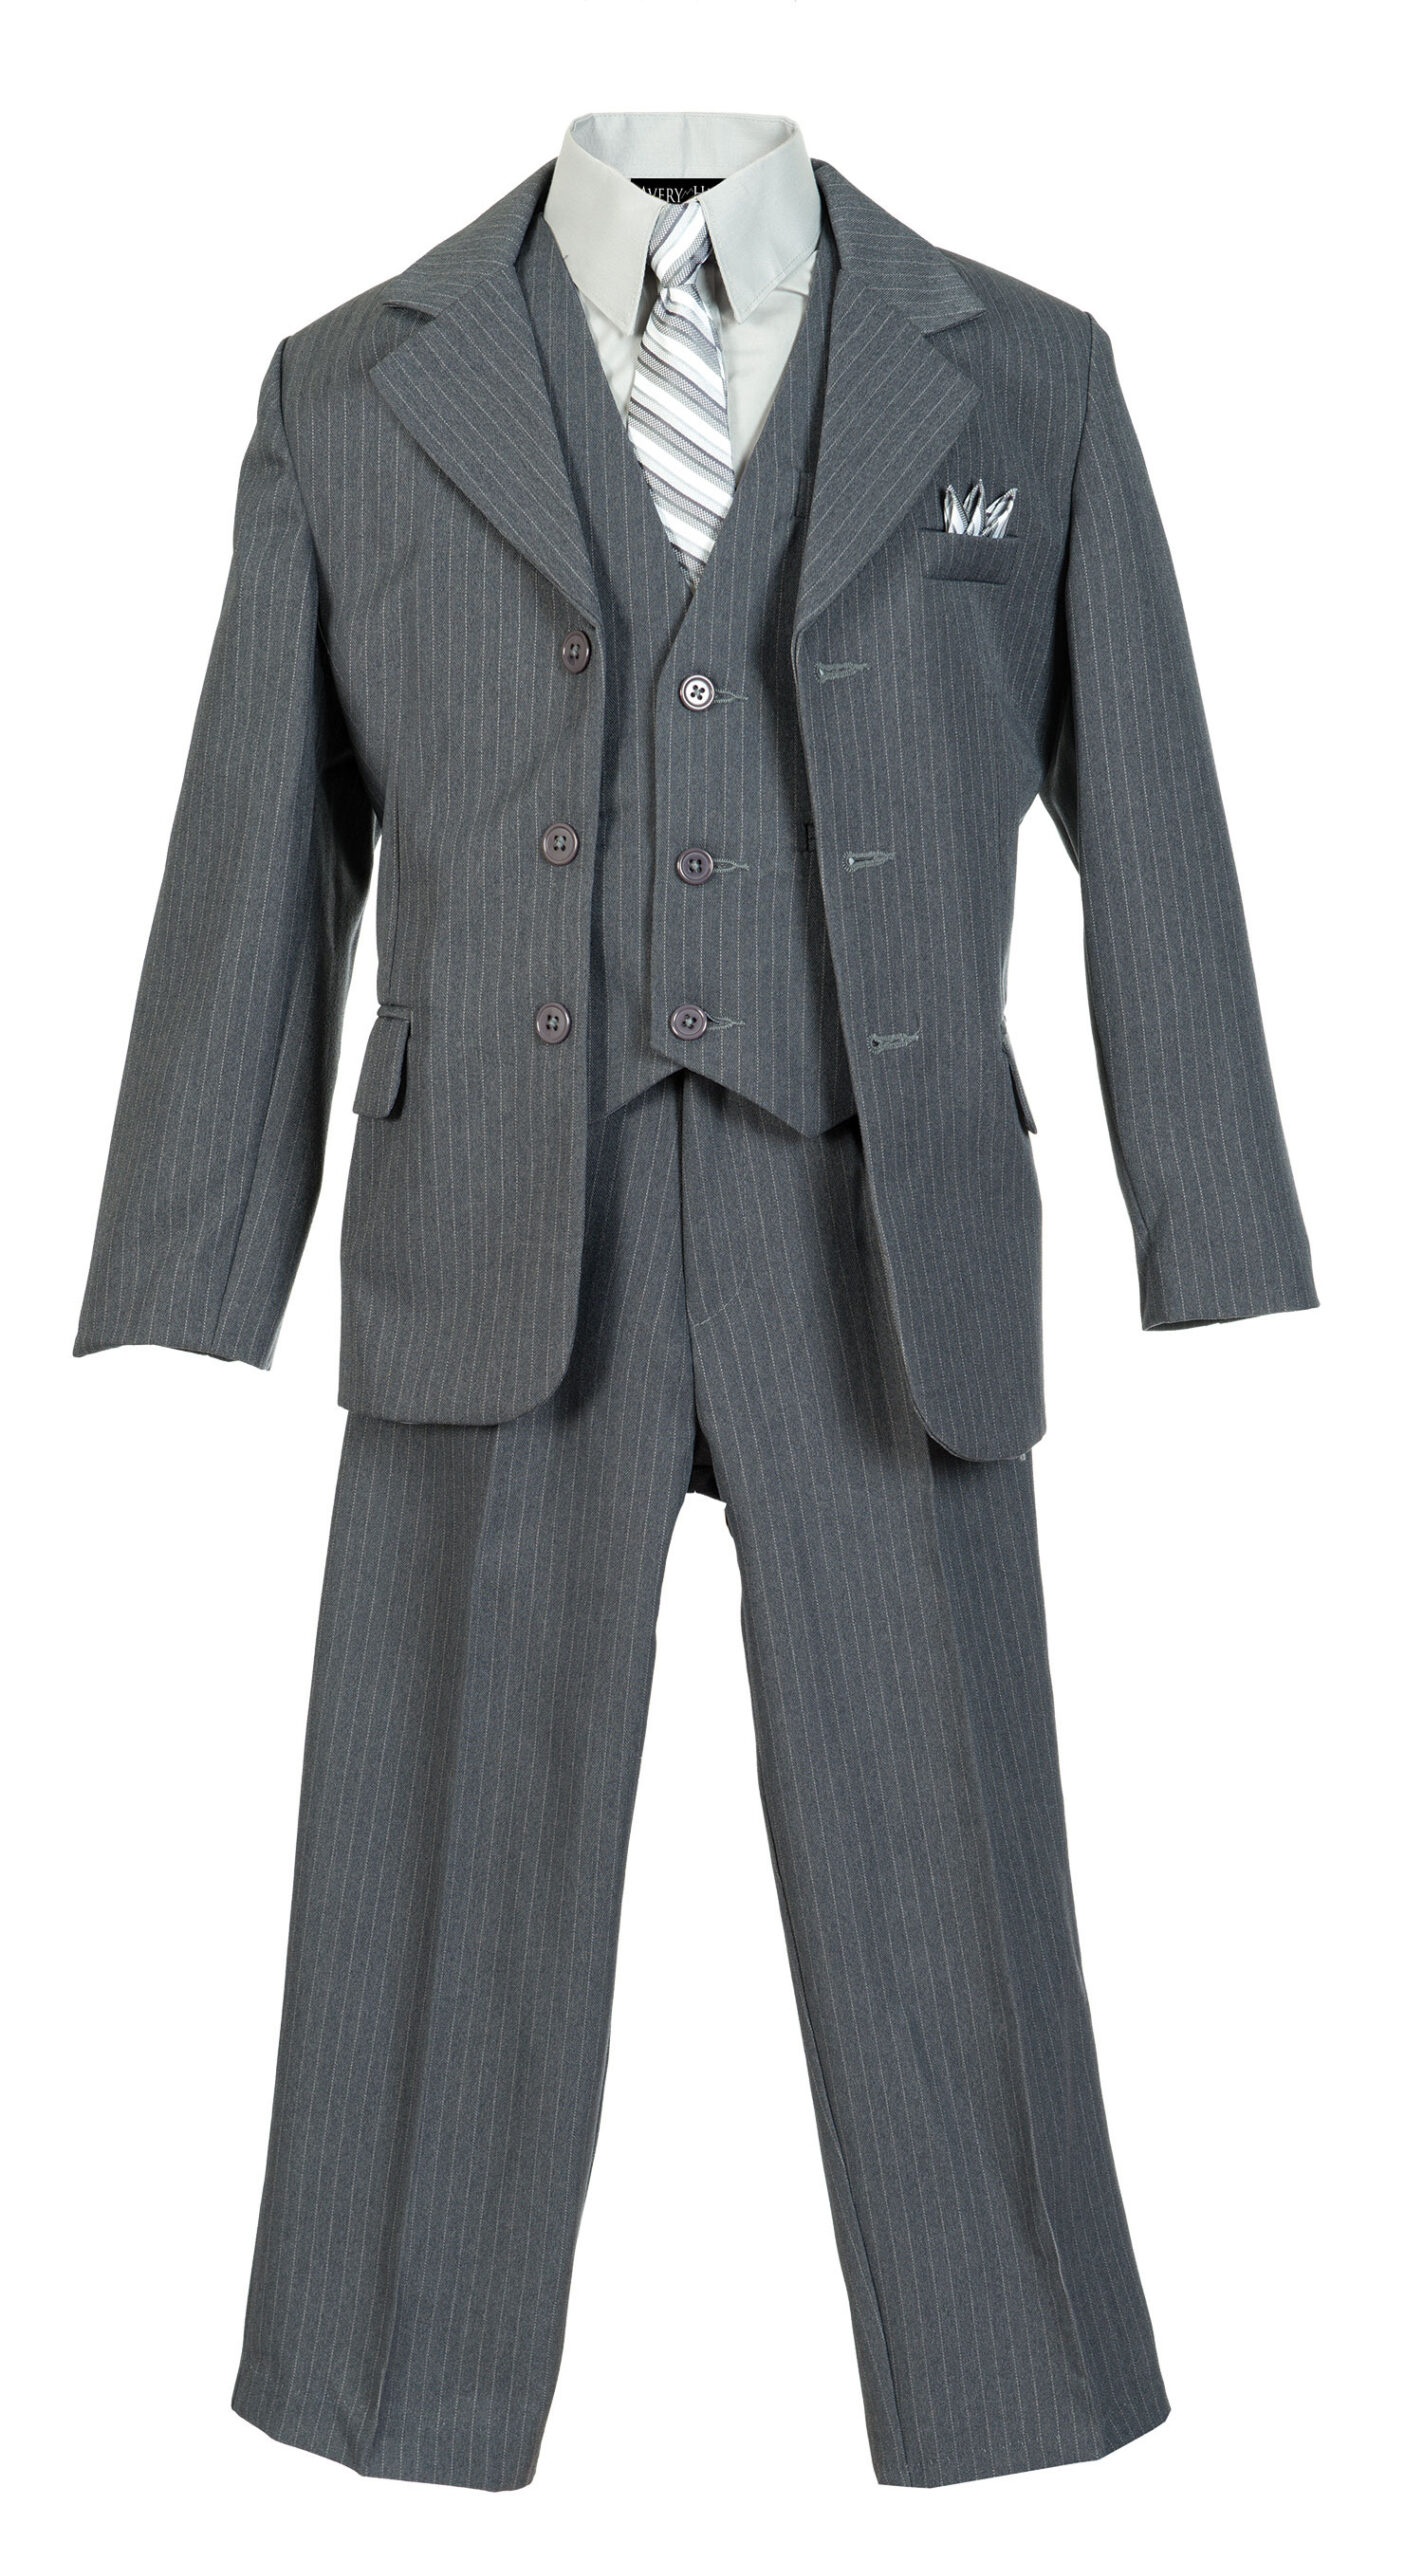 Boys Pinstripe Suit Set with Matching Tie LTGY 12